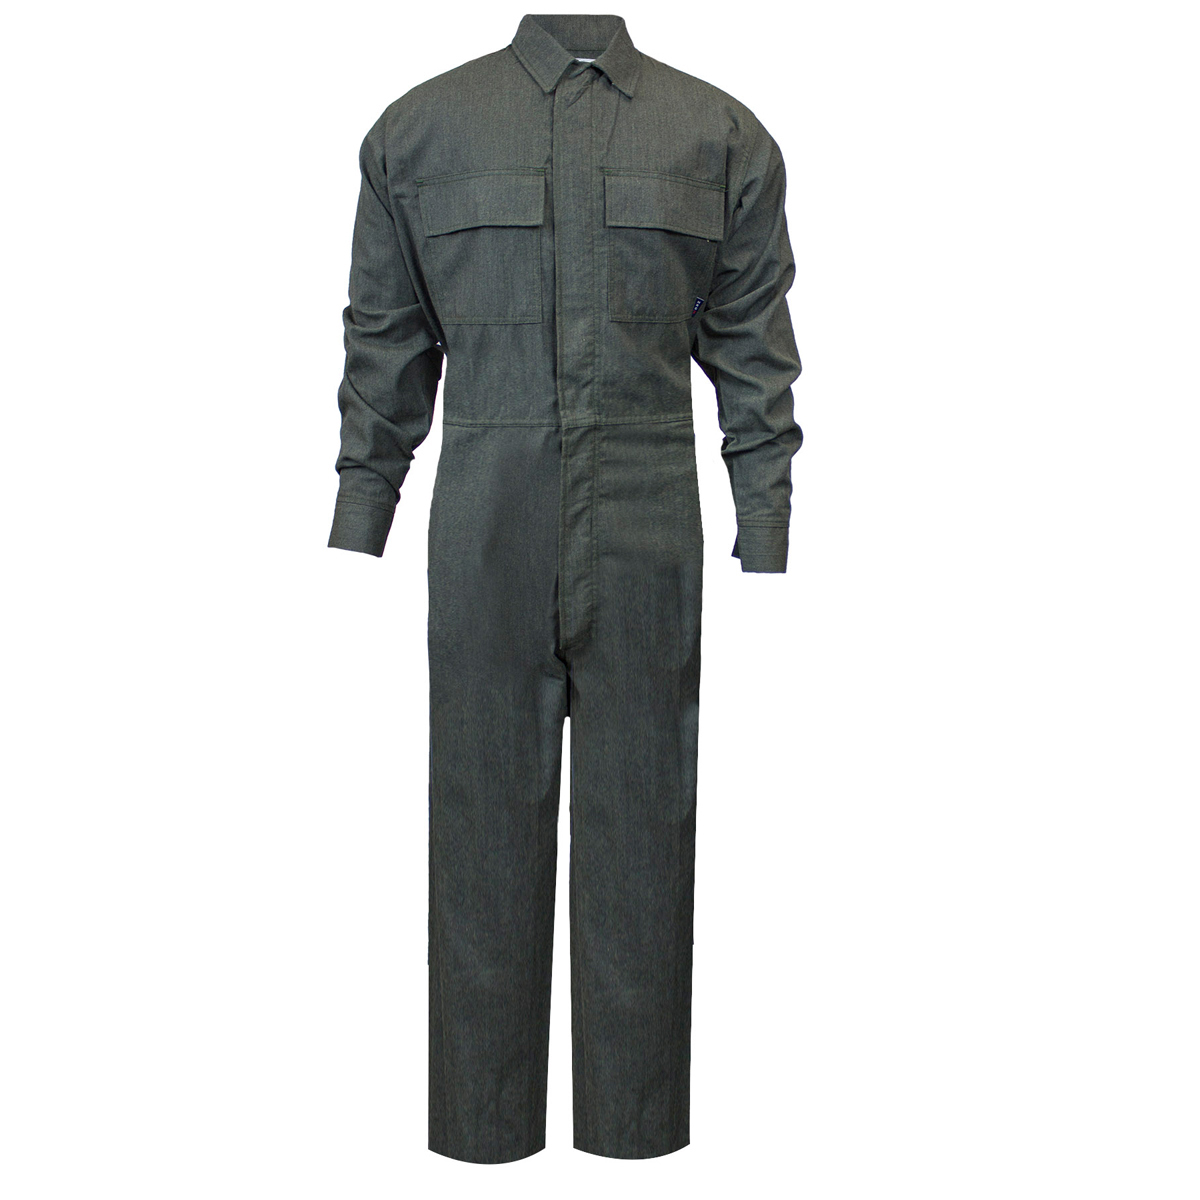 National Safety Apparel 2X Regular Green OPF Blend Twill CARBON ARMOUR™ Welding Flame Resistant Coverall With Zipper Front Closu